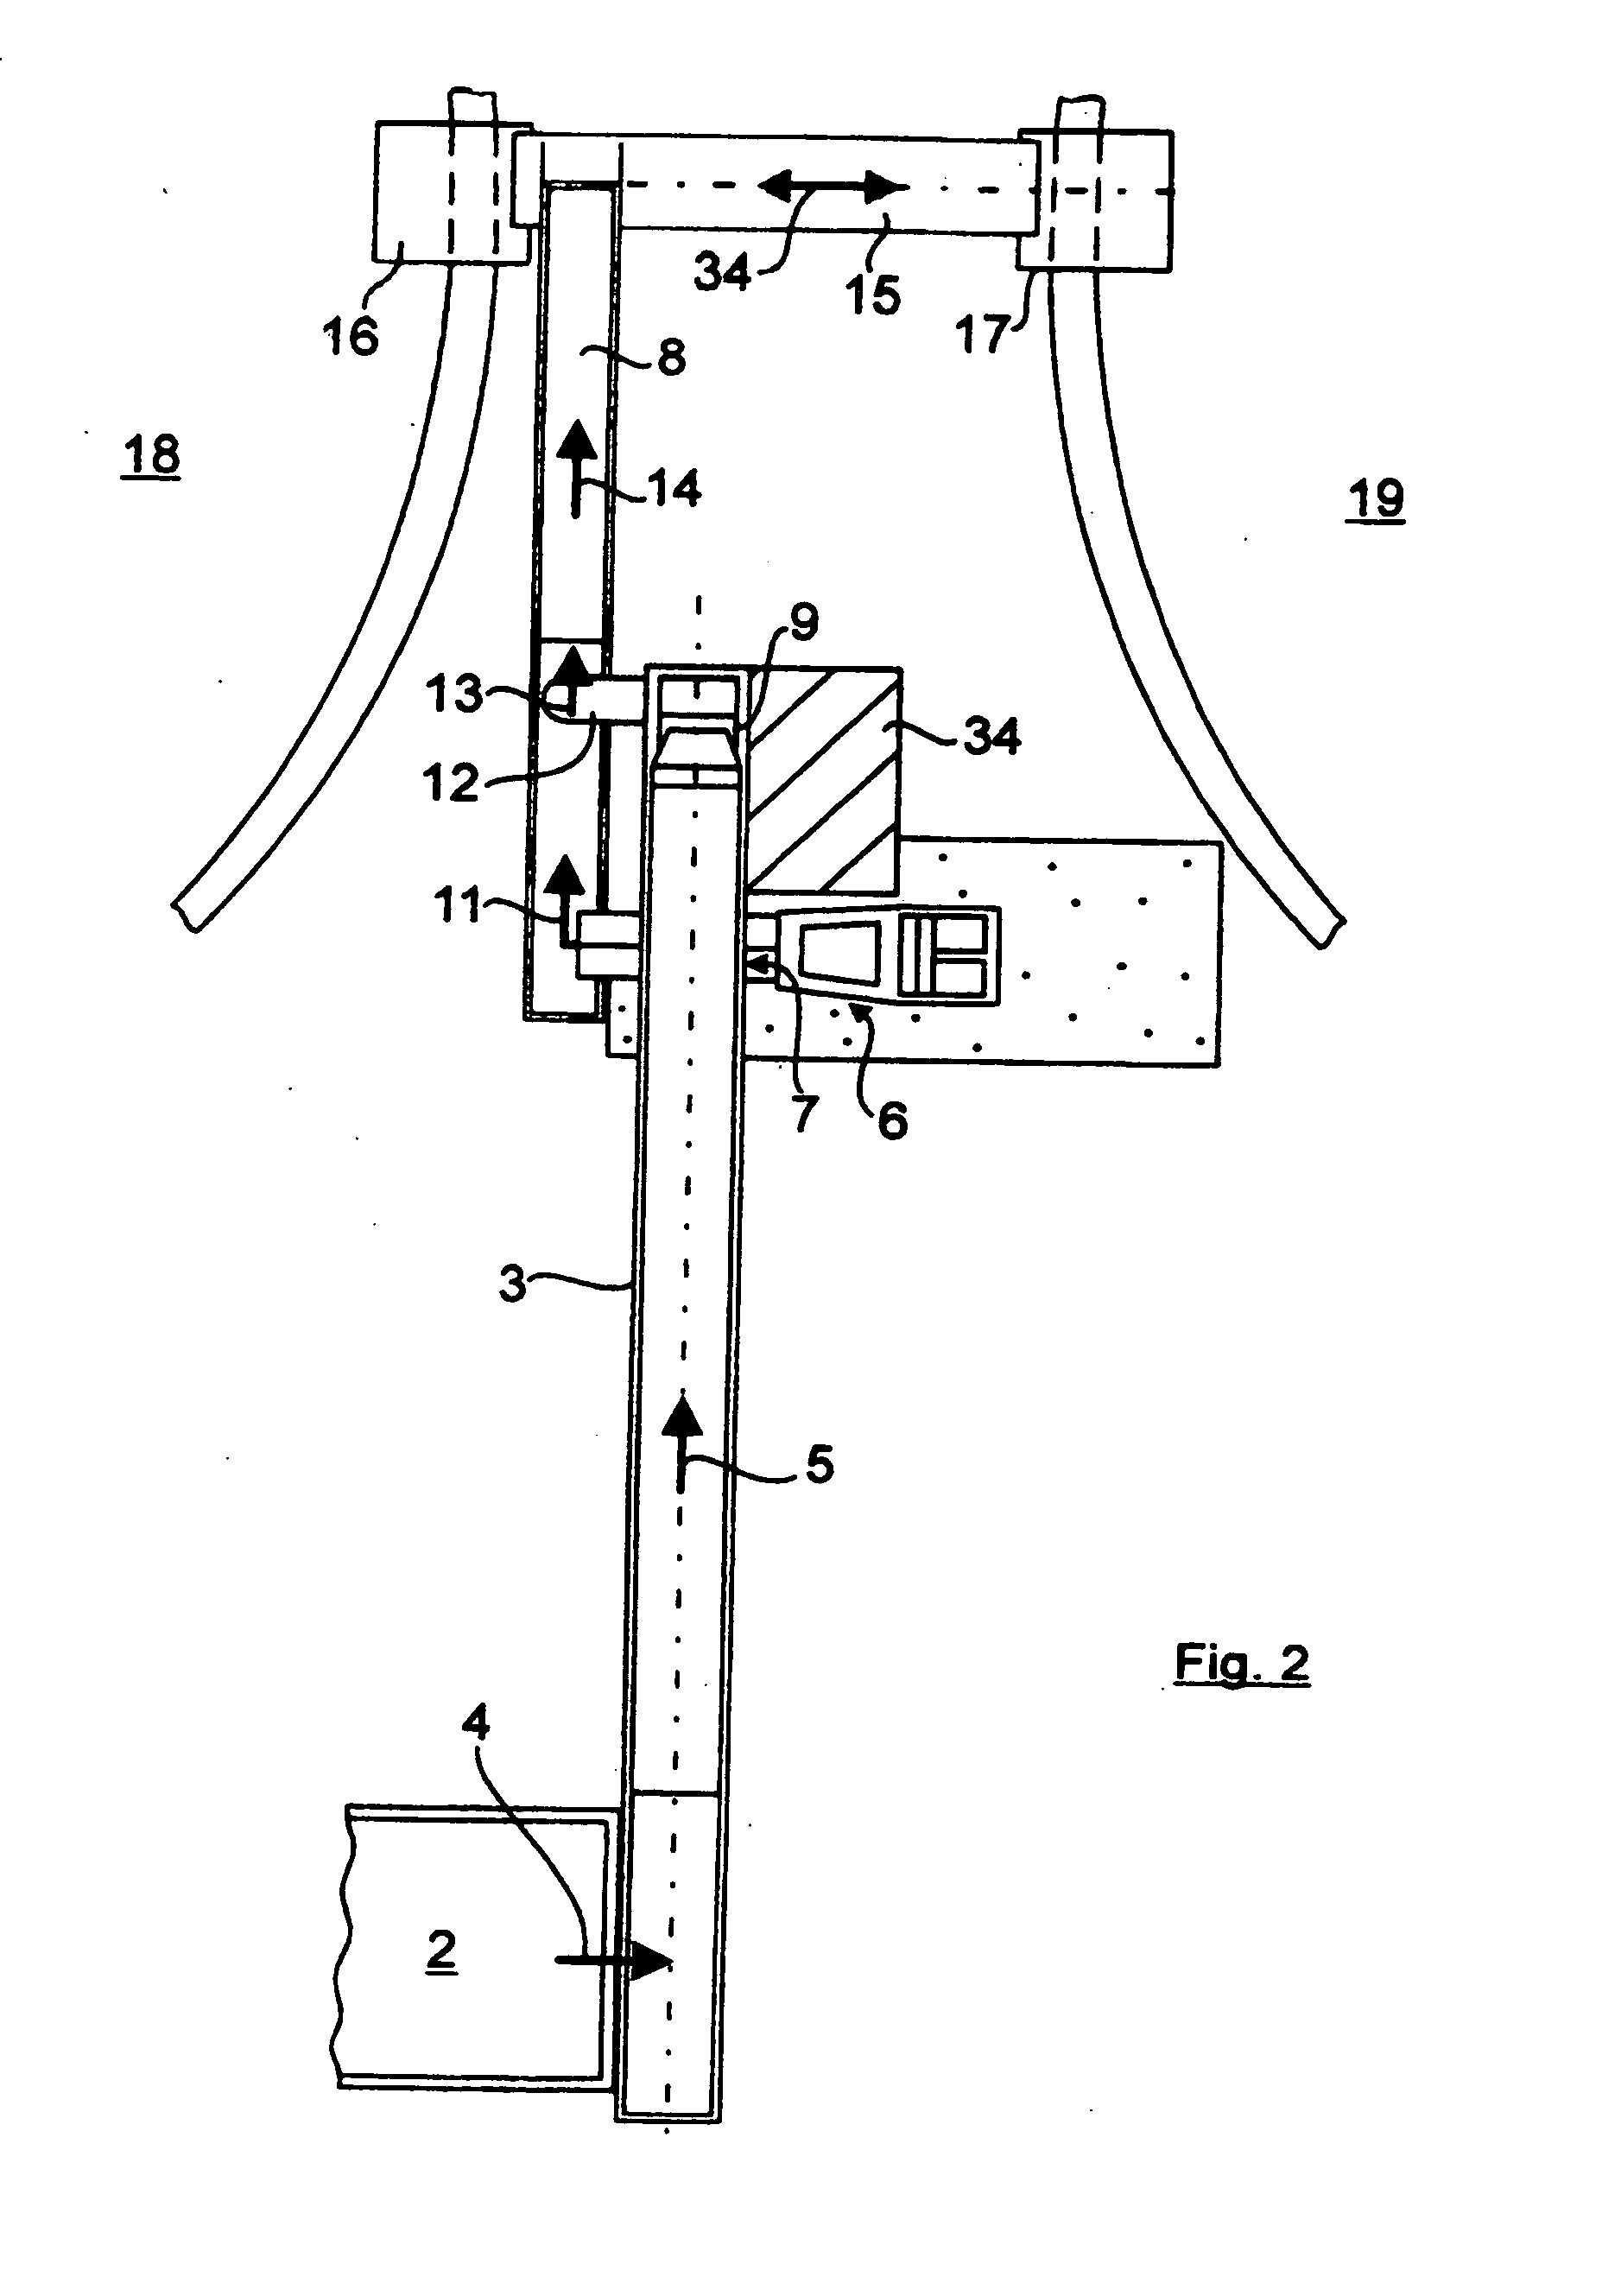 Fermenter feed system for fermentable biomass of a biogas system and method for operating the feed system